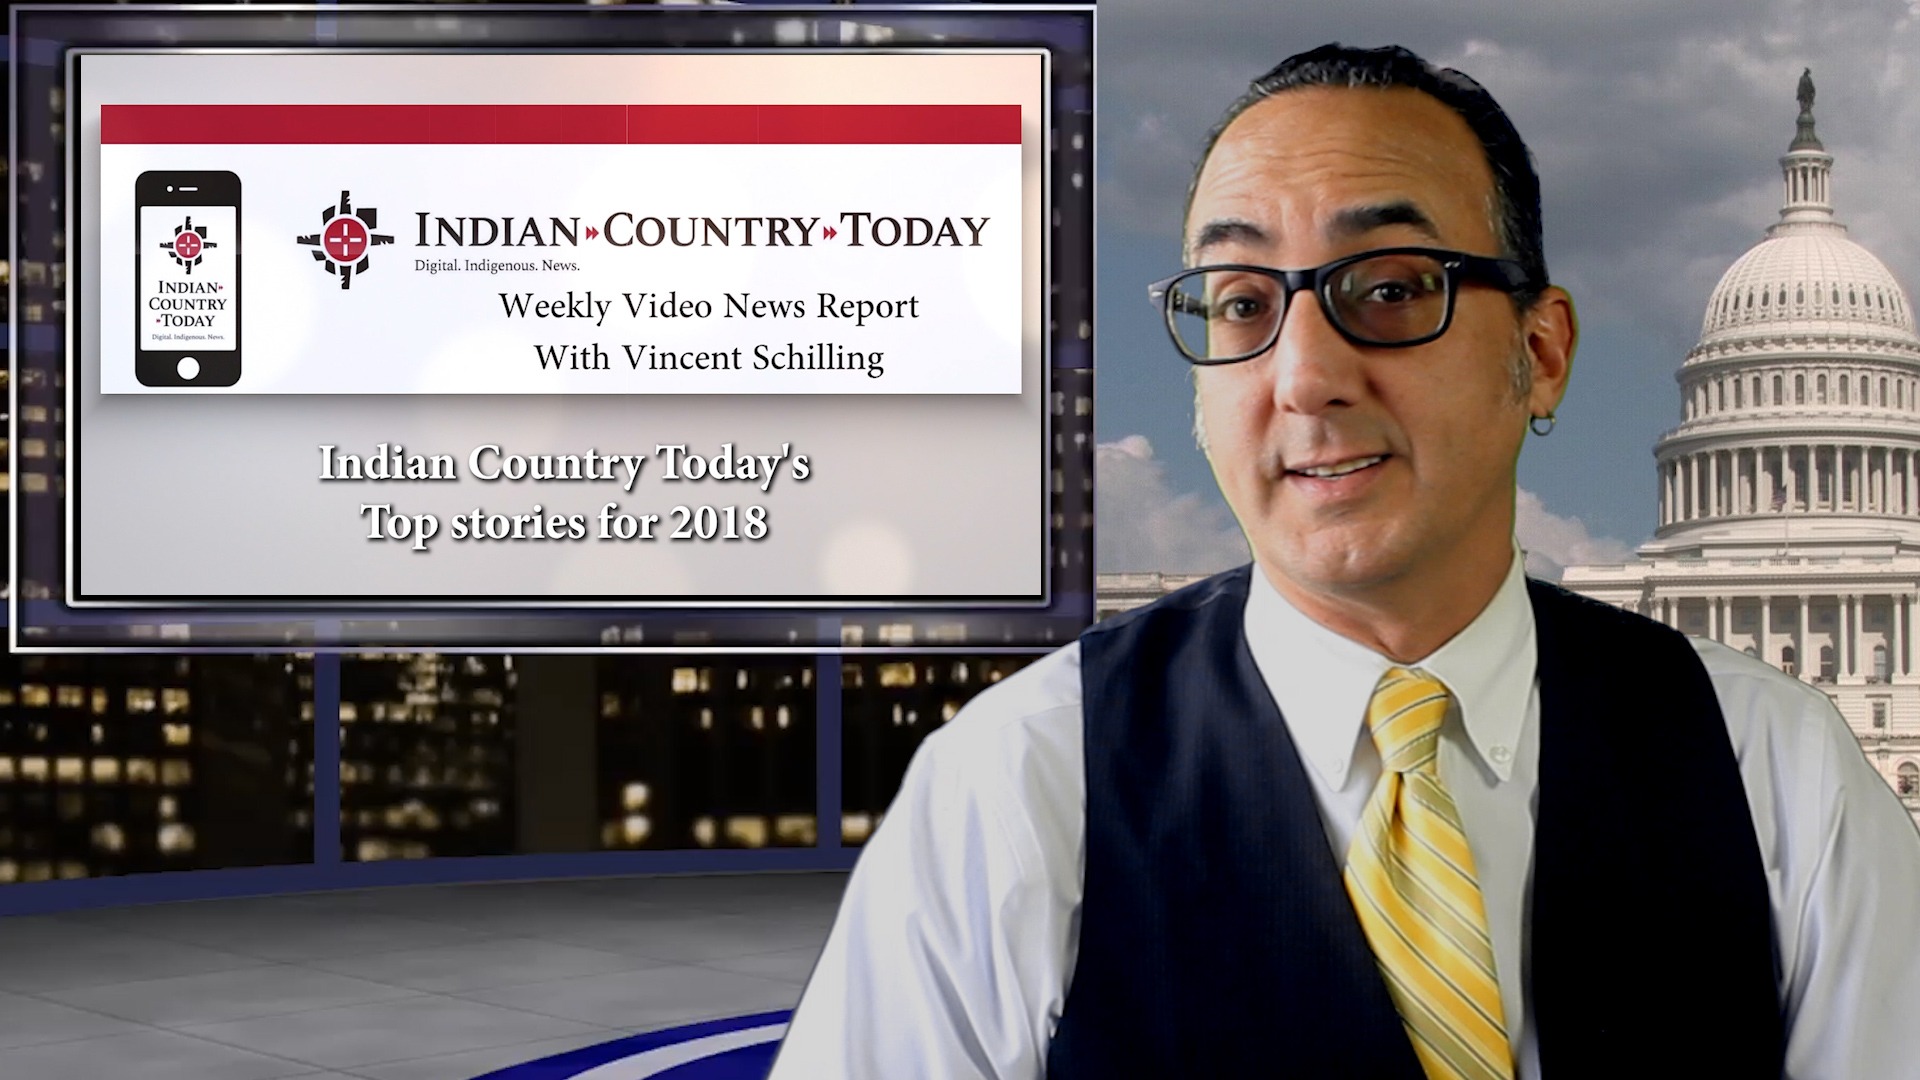 The most comprehensive list of stories of interest within Indian Country - CVMT